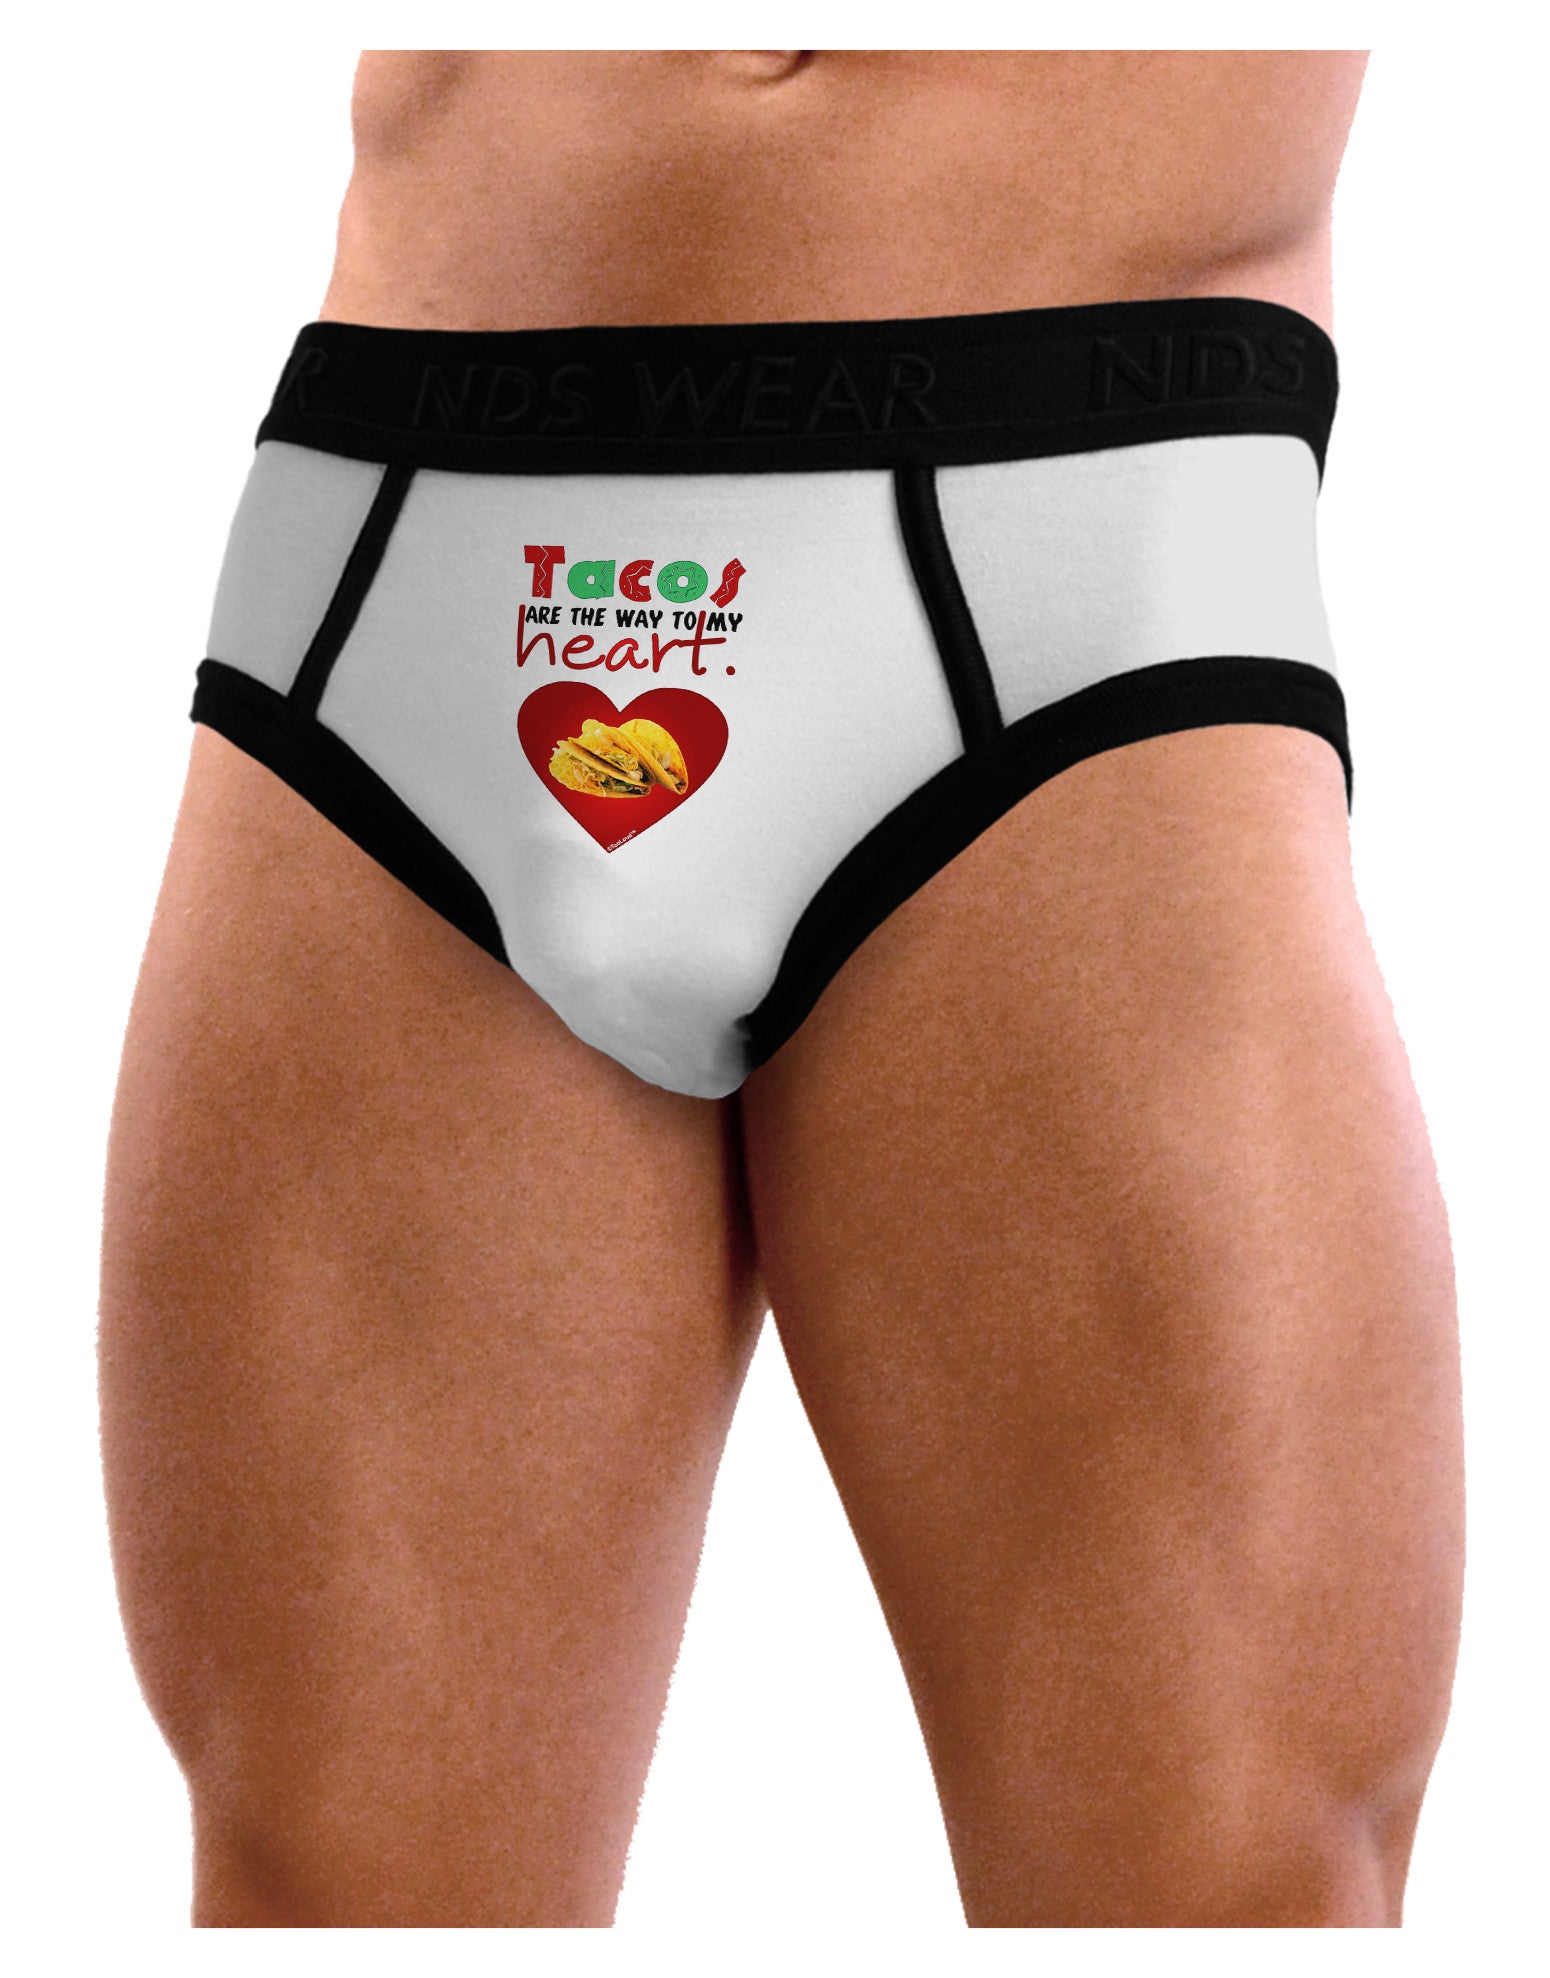 Tacos Are the Way To My Heart Mens NDS Wear Briefs Underwear